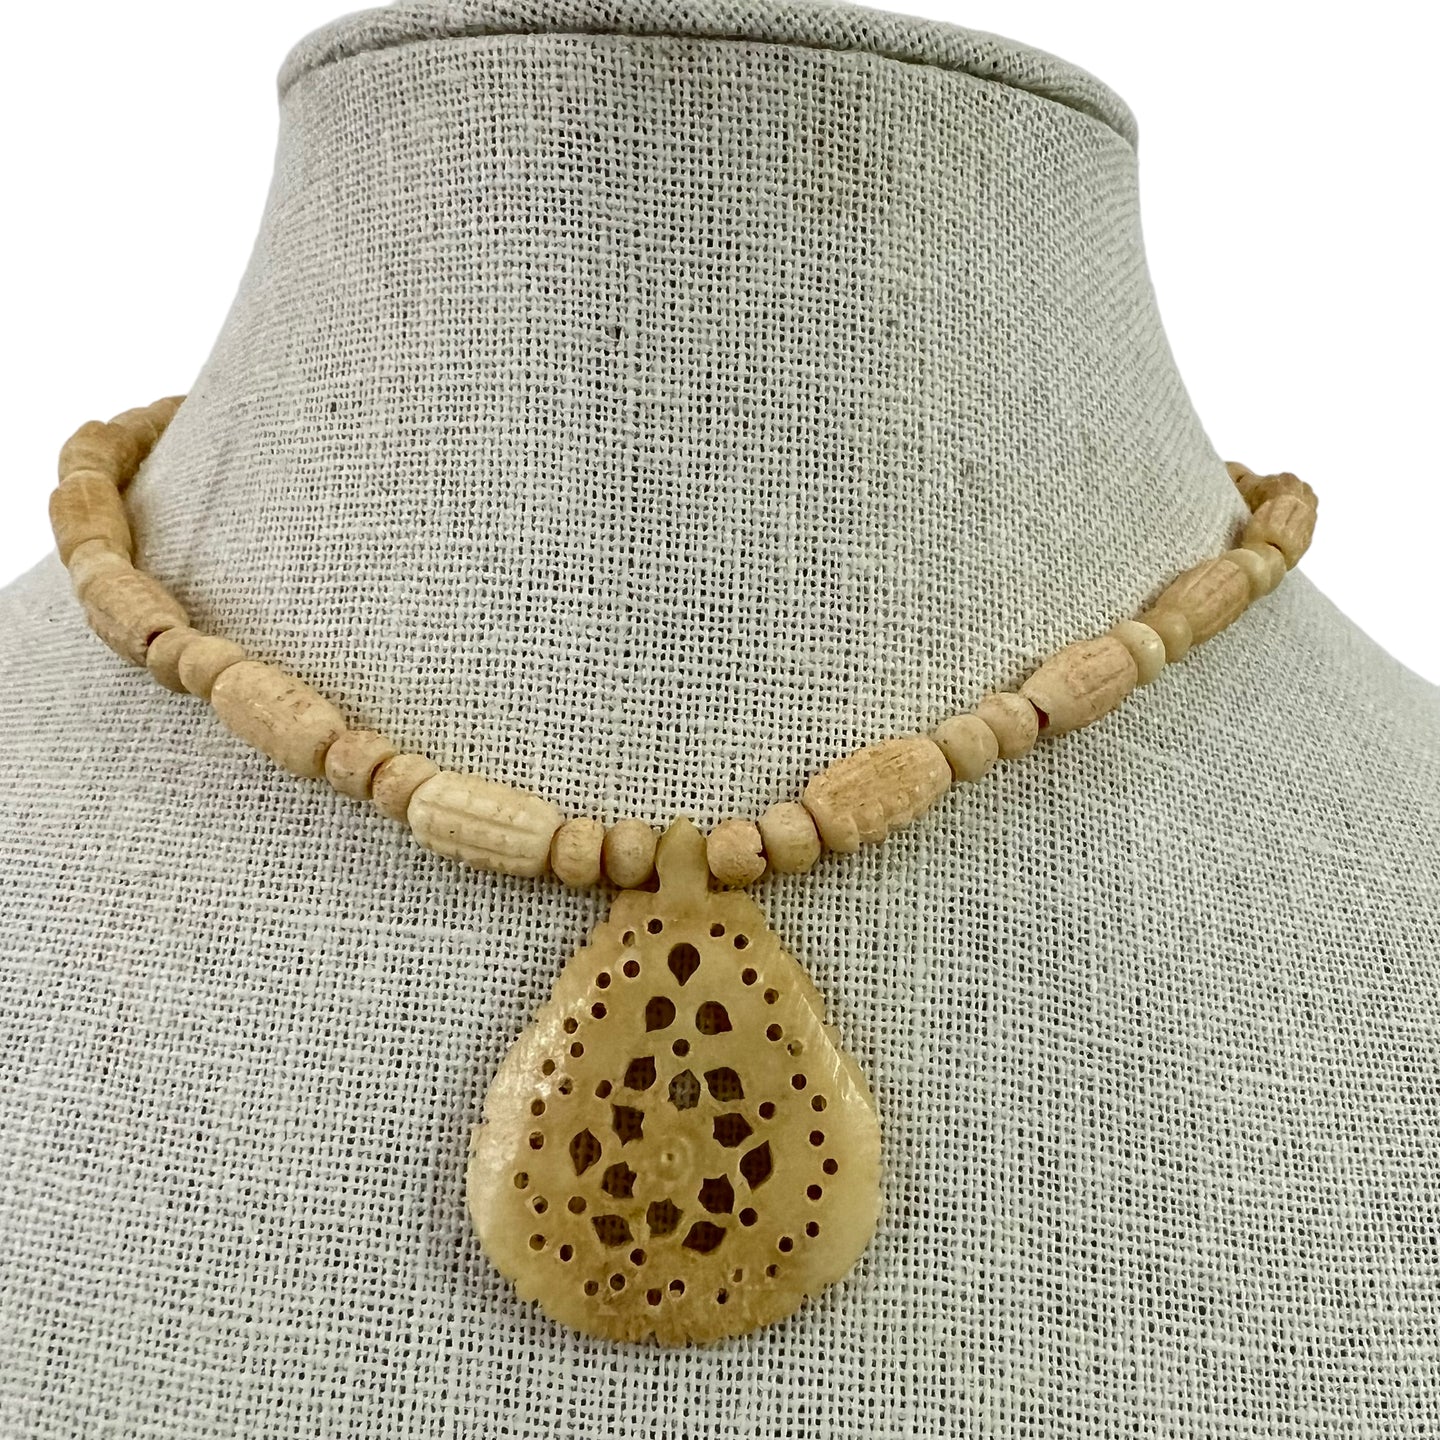 Vintage Ivory colored Hand-carved Necklace 15